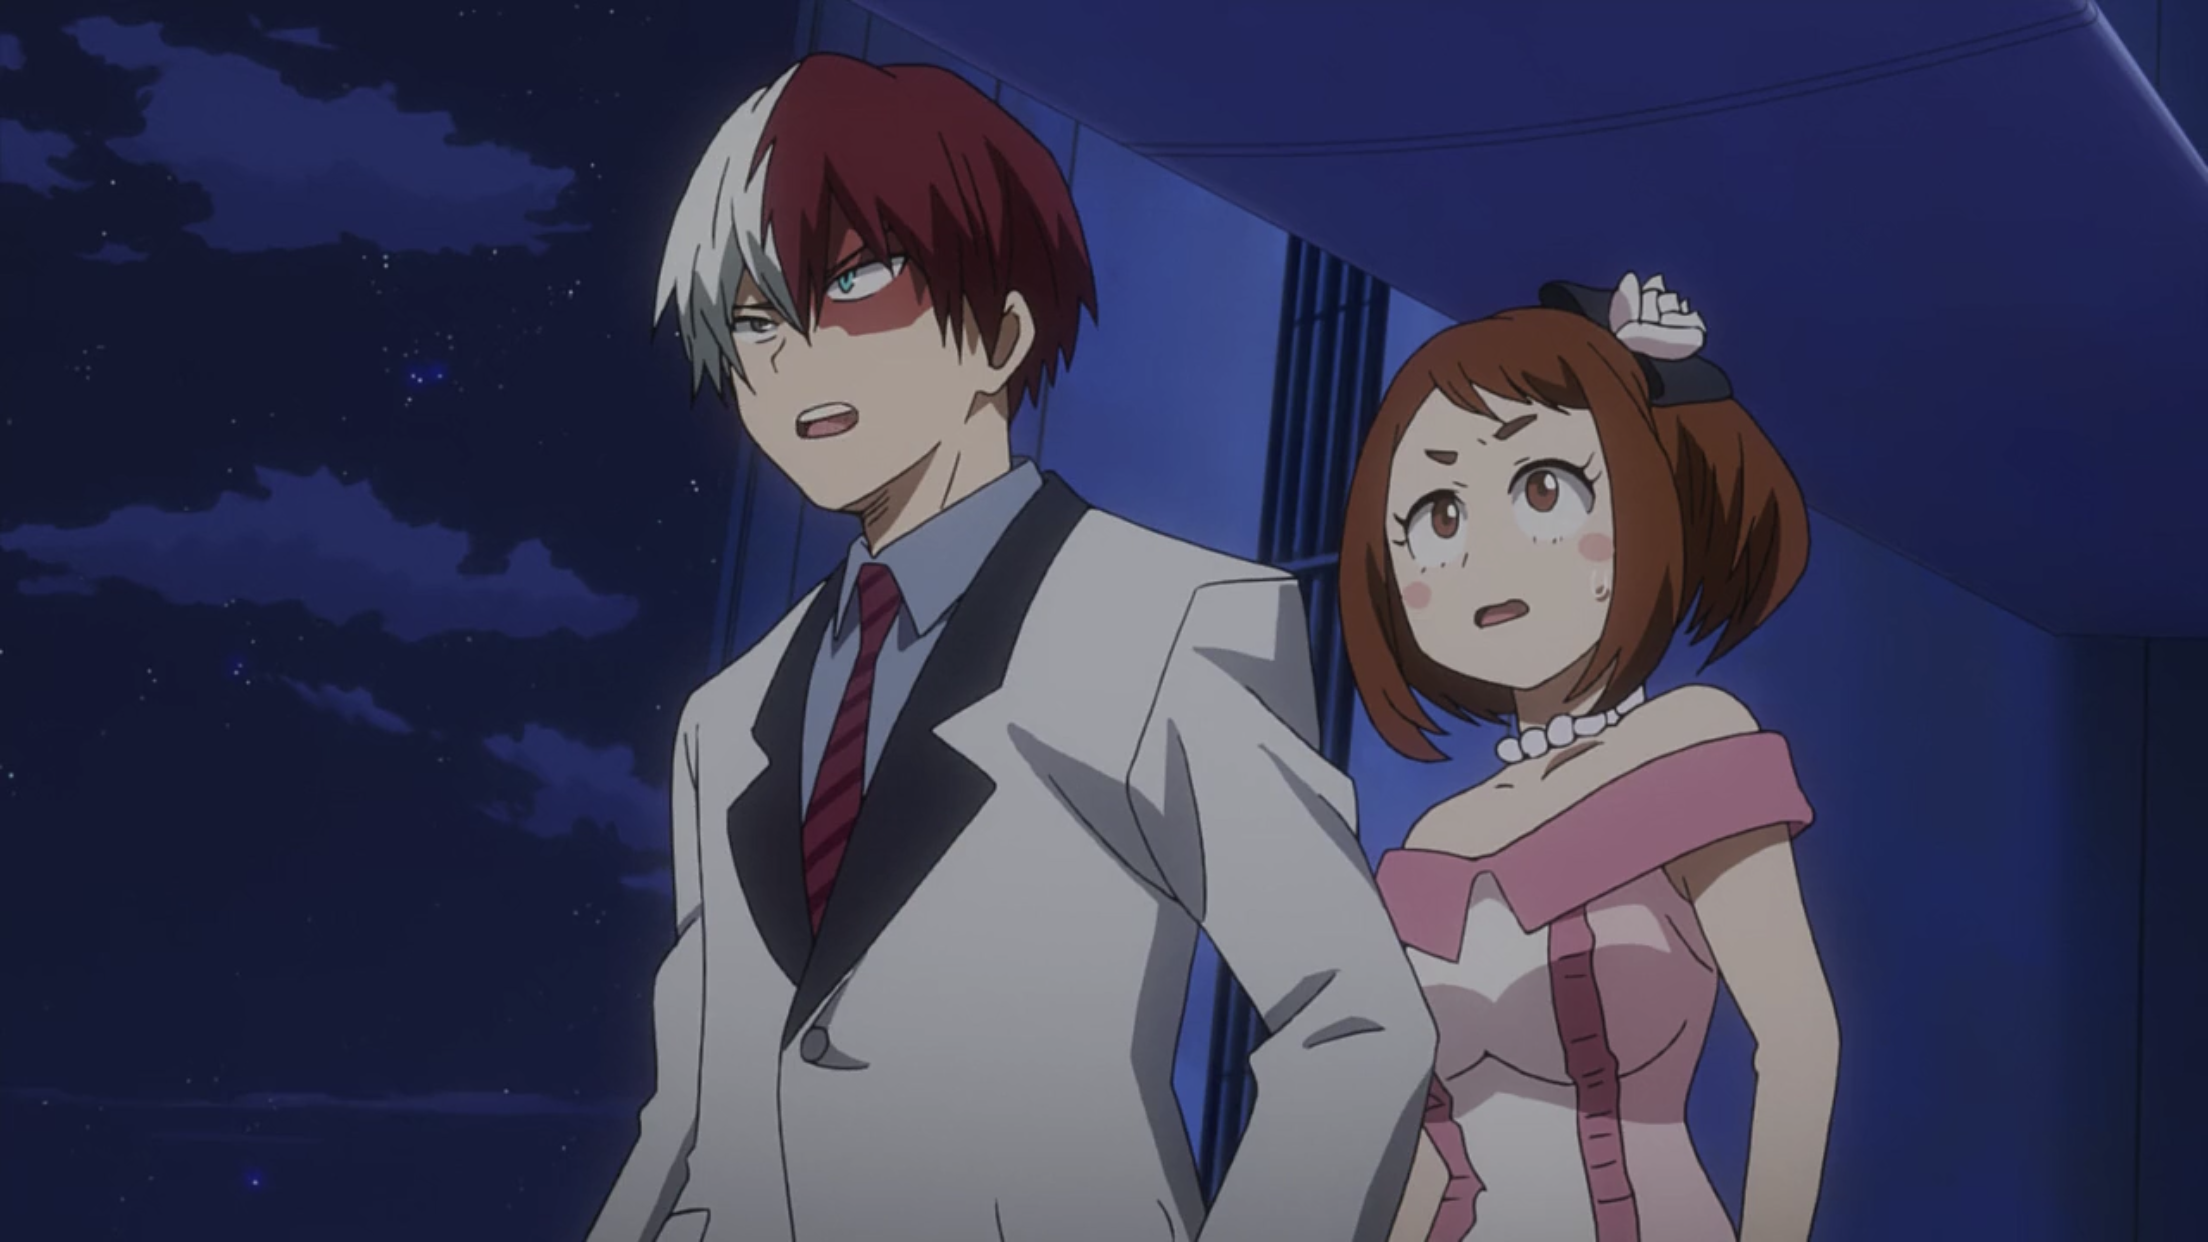 Who is Todoroki shipped with most?